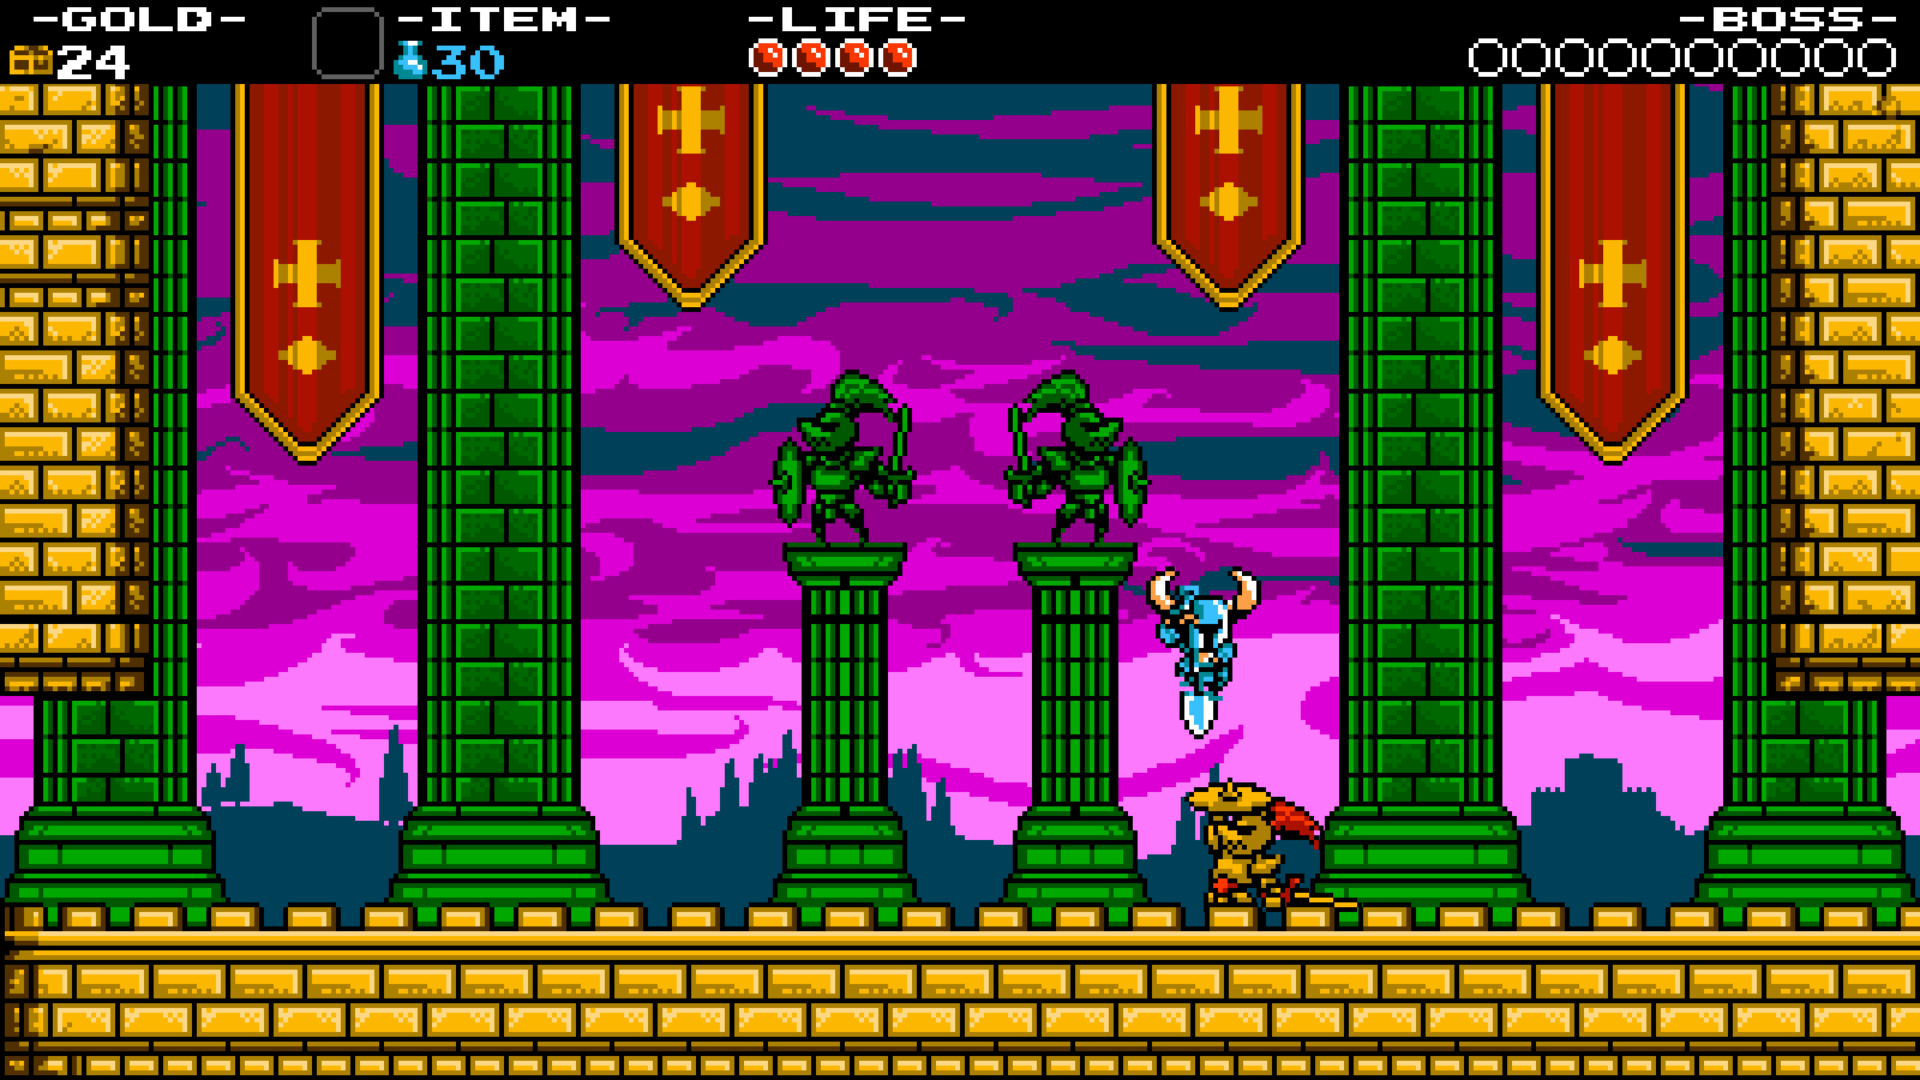 Shovel Knight, Shovel Knight: Treasure Trove, Playstation 4, PS4, Asia, release date, gameplay, features, price, pre-order, physical edition, Yacht Club Games, Multi-language, trailer, English, Chinese, Japanese